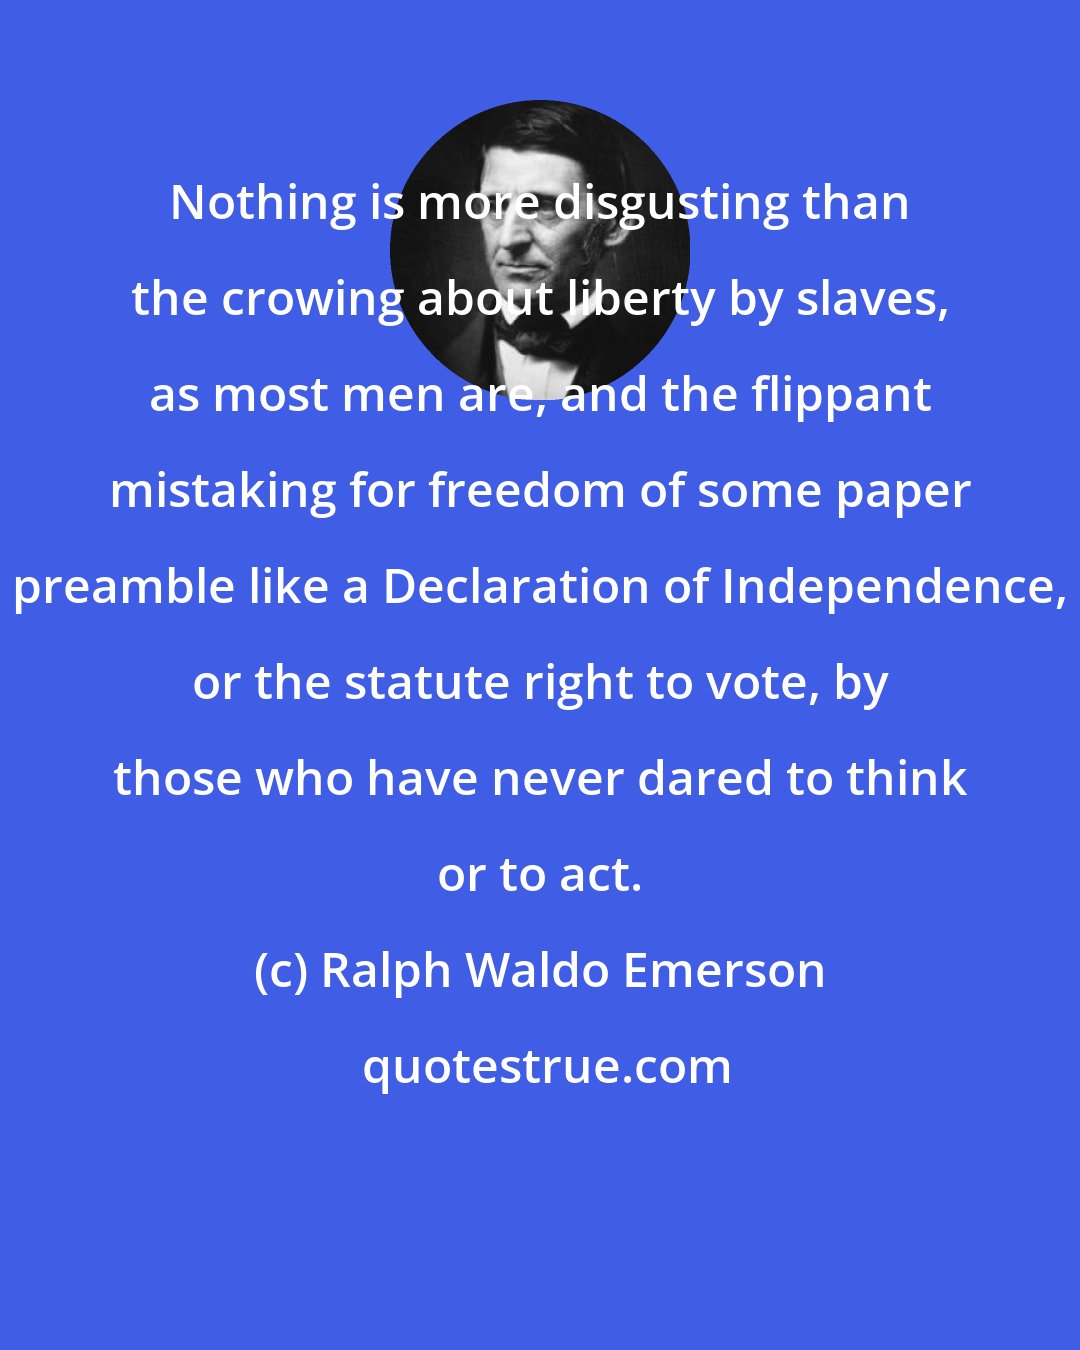 Ralph Waldo Emerson: Nothing is more disgusting than the crowing about liberty by slaves, as most men are, and the flippant mistaking for freedom of some paper preamble like a Declaration of Independence, or the statute right to vote, by those who have never dared to think or to act.